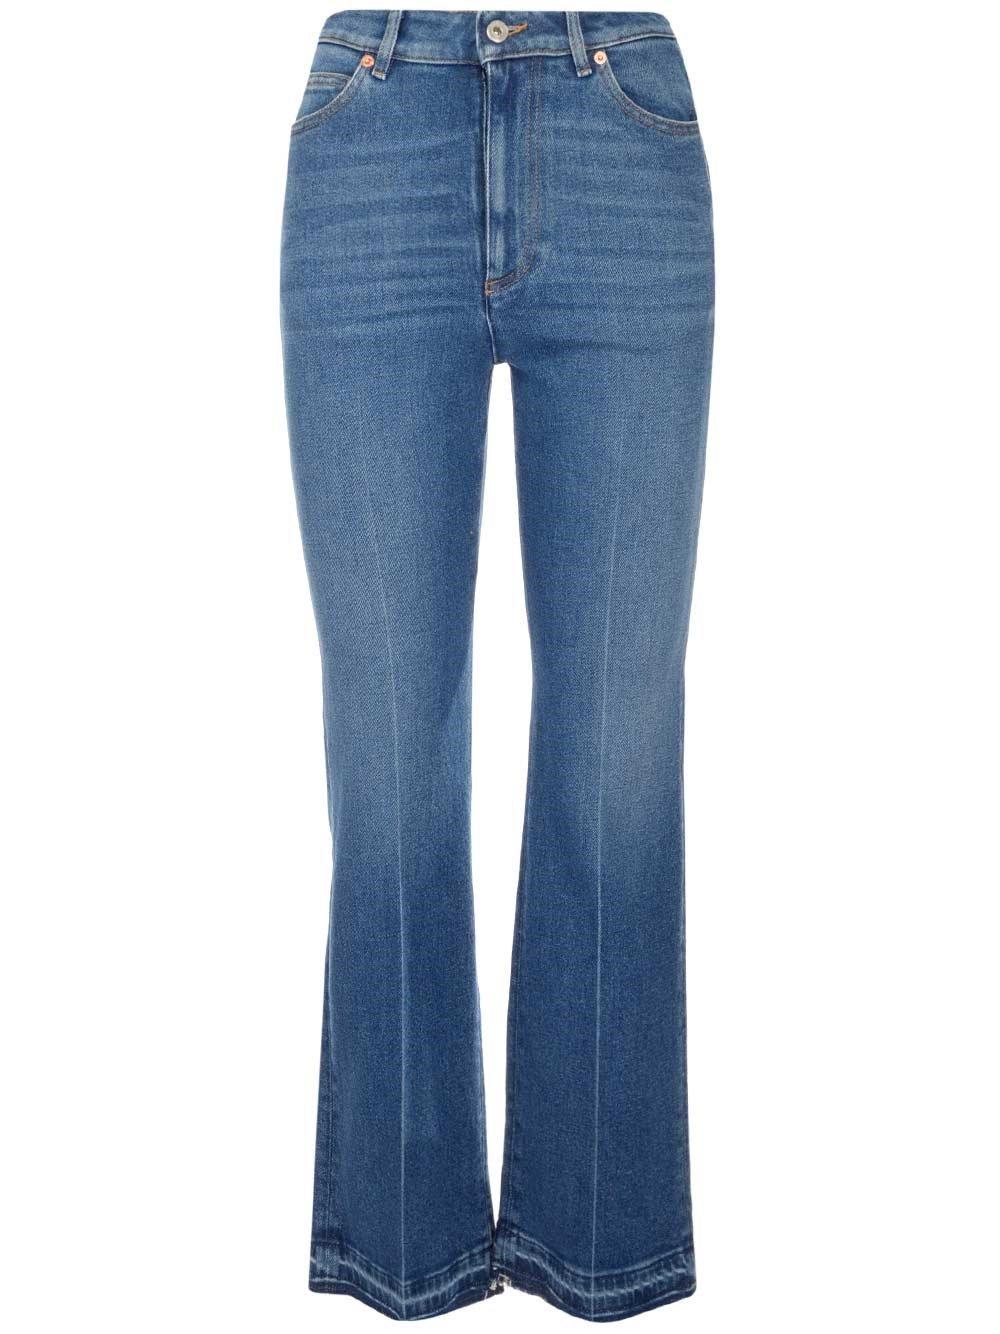 VALENTINO LOGO PATCH FLARED JEANS 